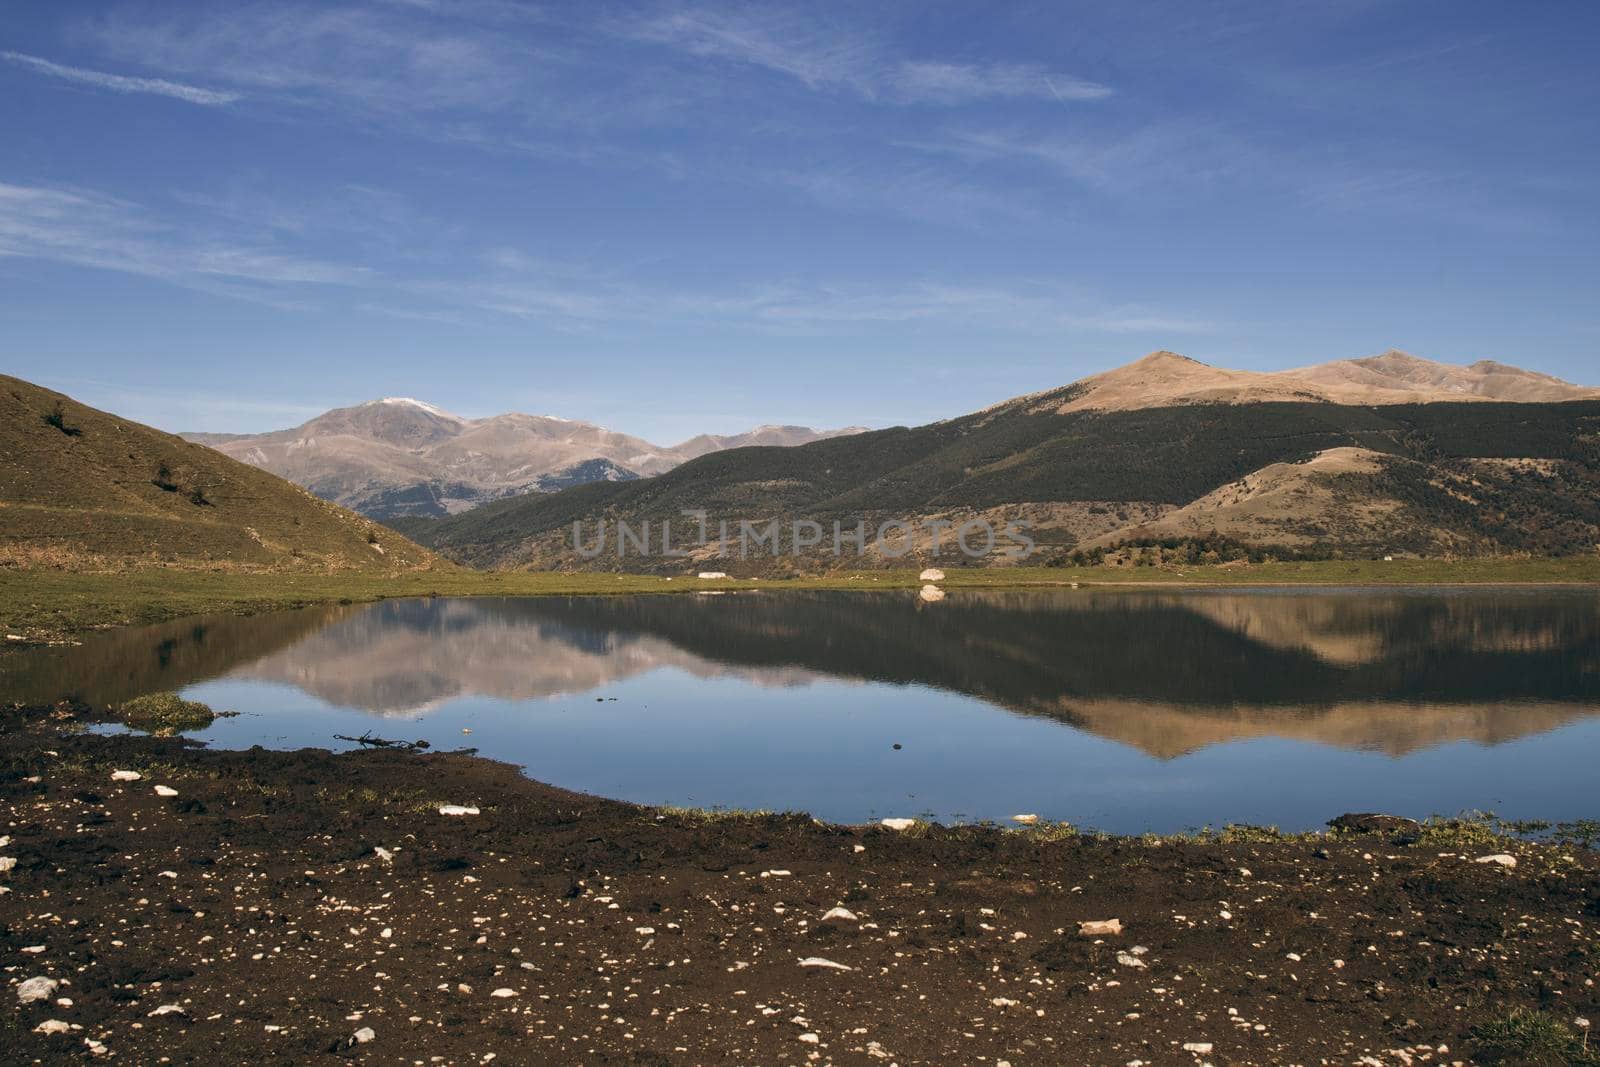 Landscape showing some mountains and its reflection on a lake with a blue sky